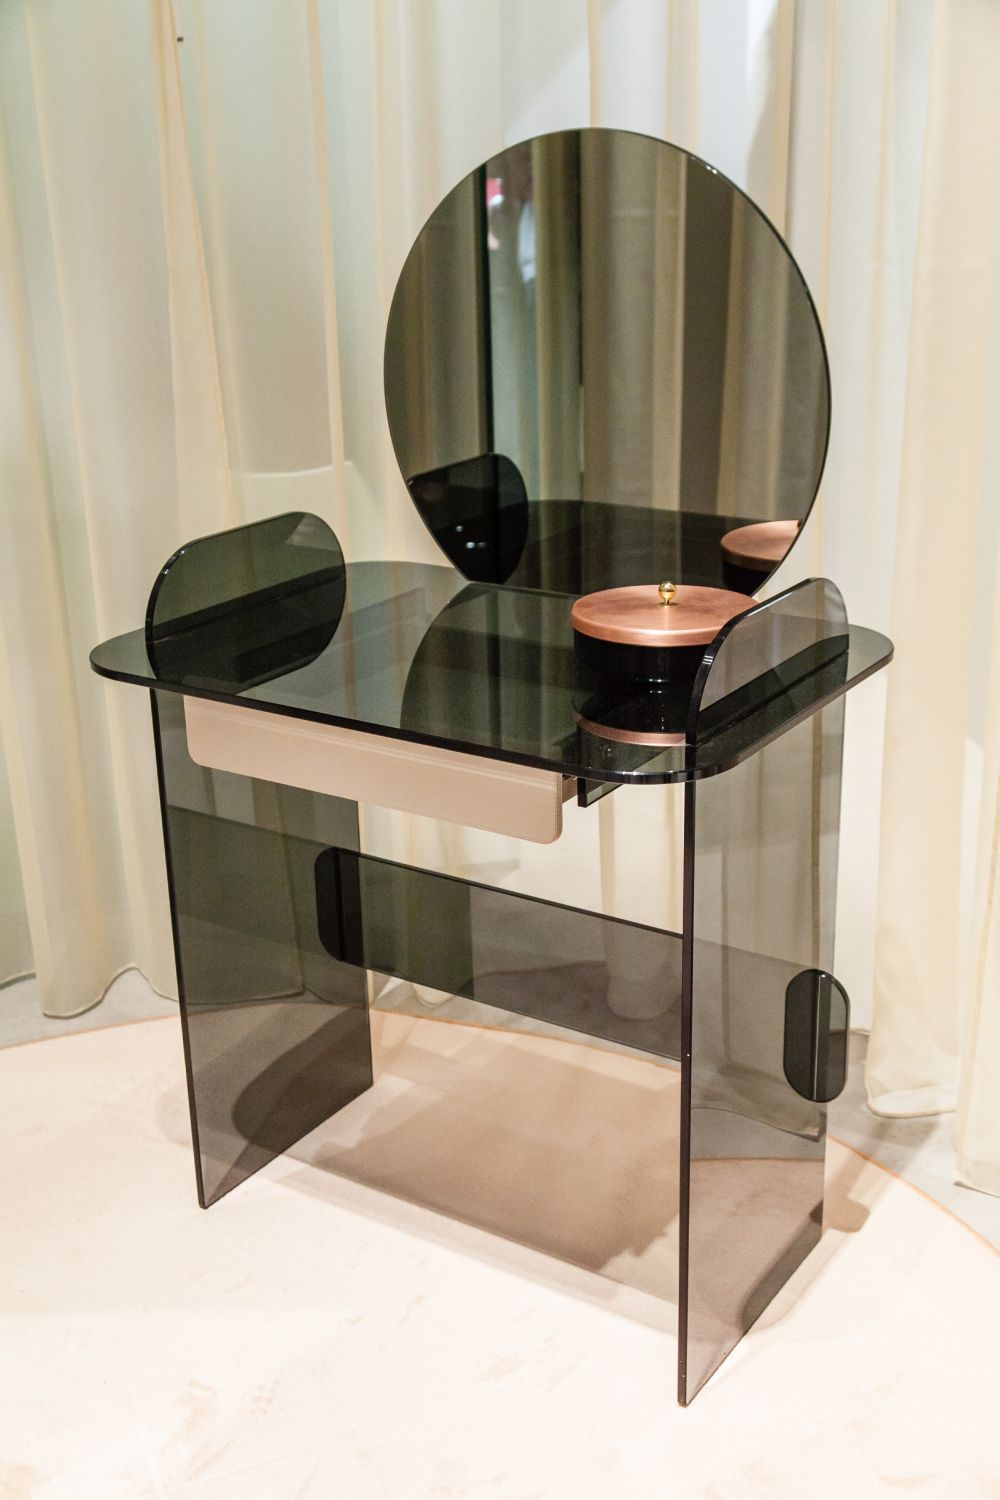 Makeup tables modern makeup tables with simple yet exquisite designs KDJZVPM